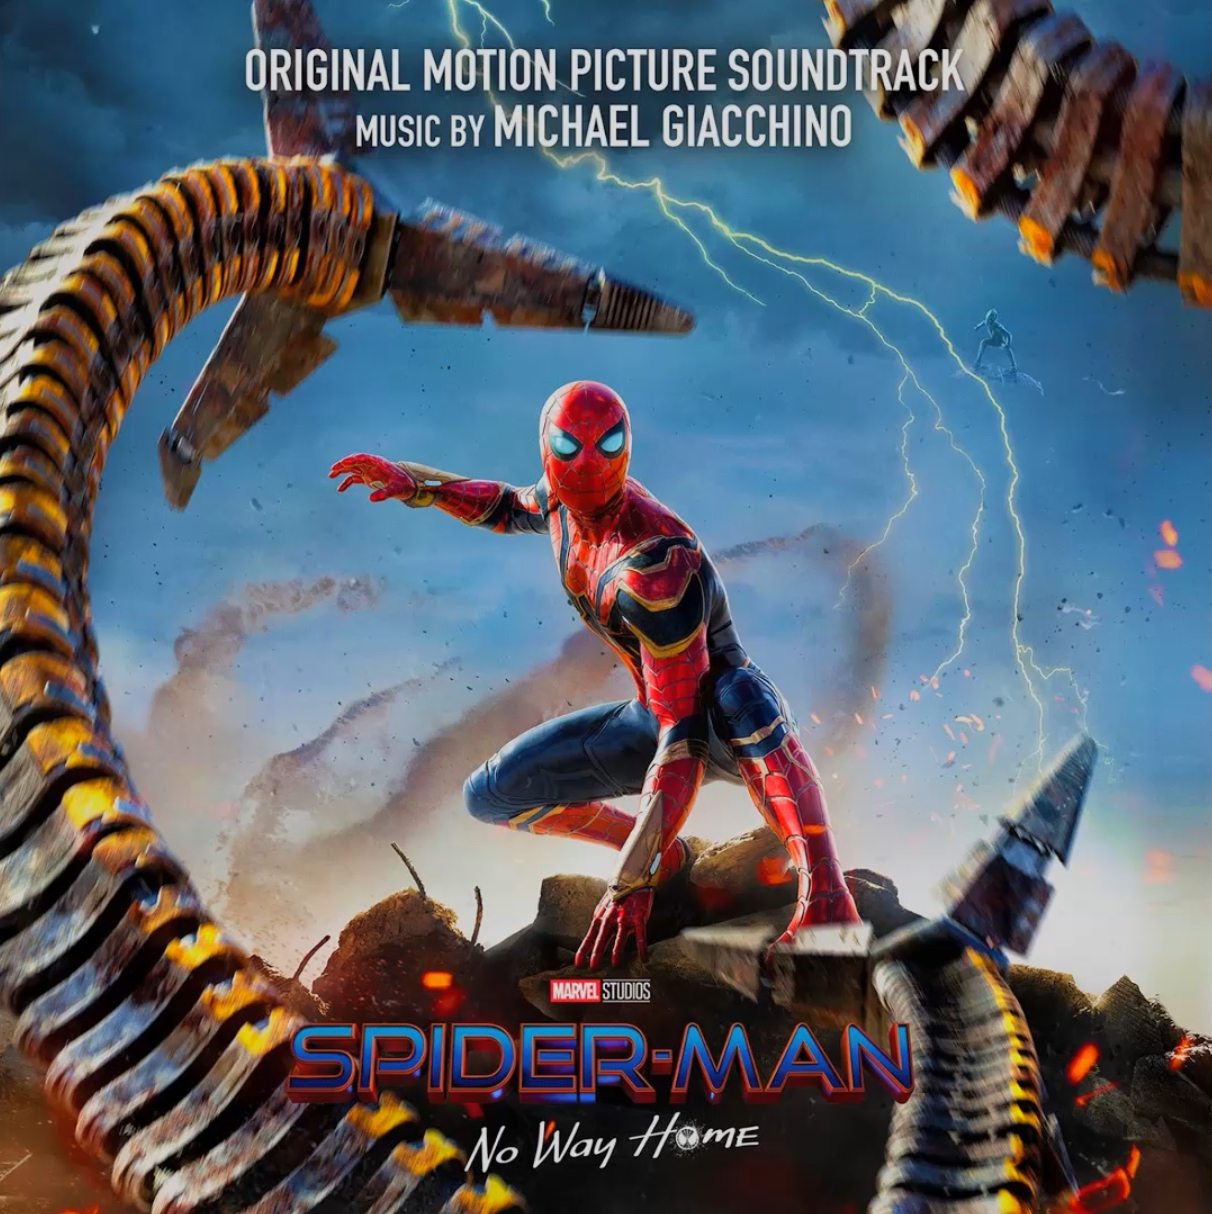 Michael Giacchino - Spider-Man: No Way Home 蜘蛛俠3:英雄無歸 (Original Motion Picture Soundtrack) (2021) [iTunes Plus AAC M4A] + Hi-Res-新房子